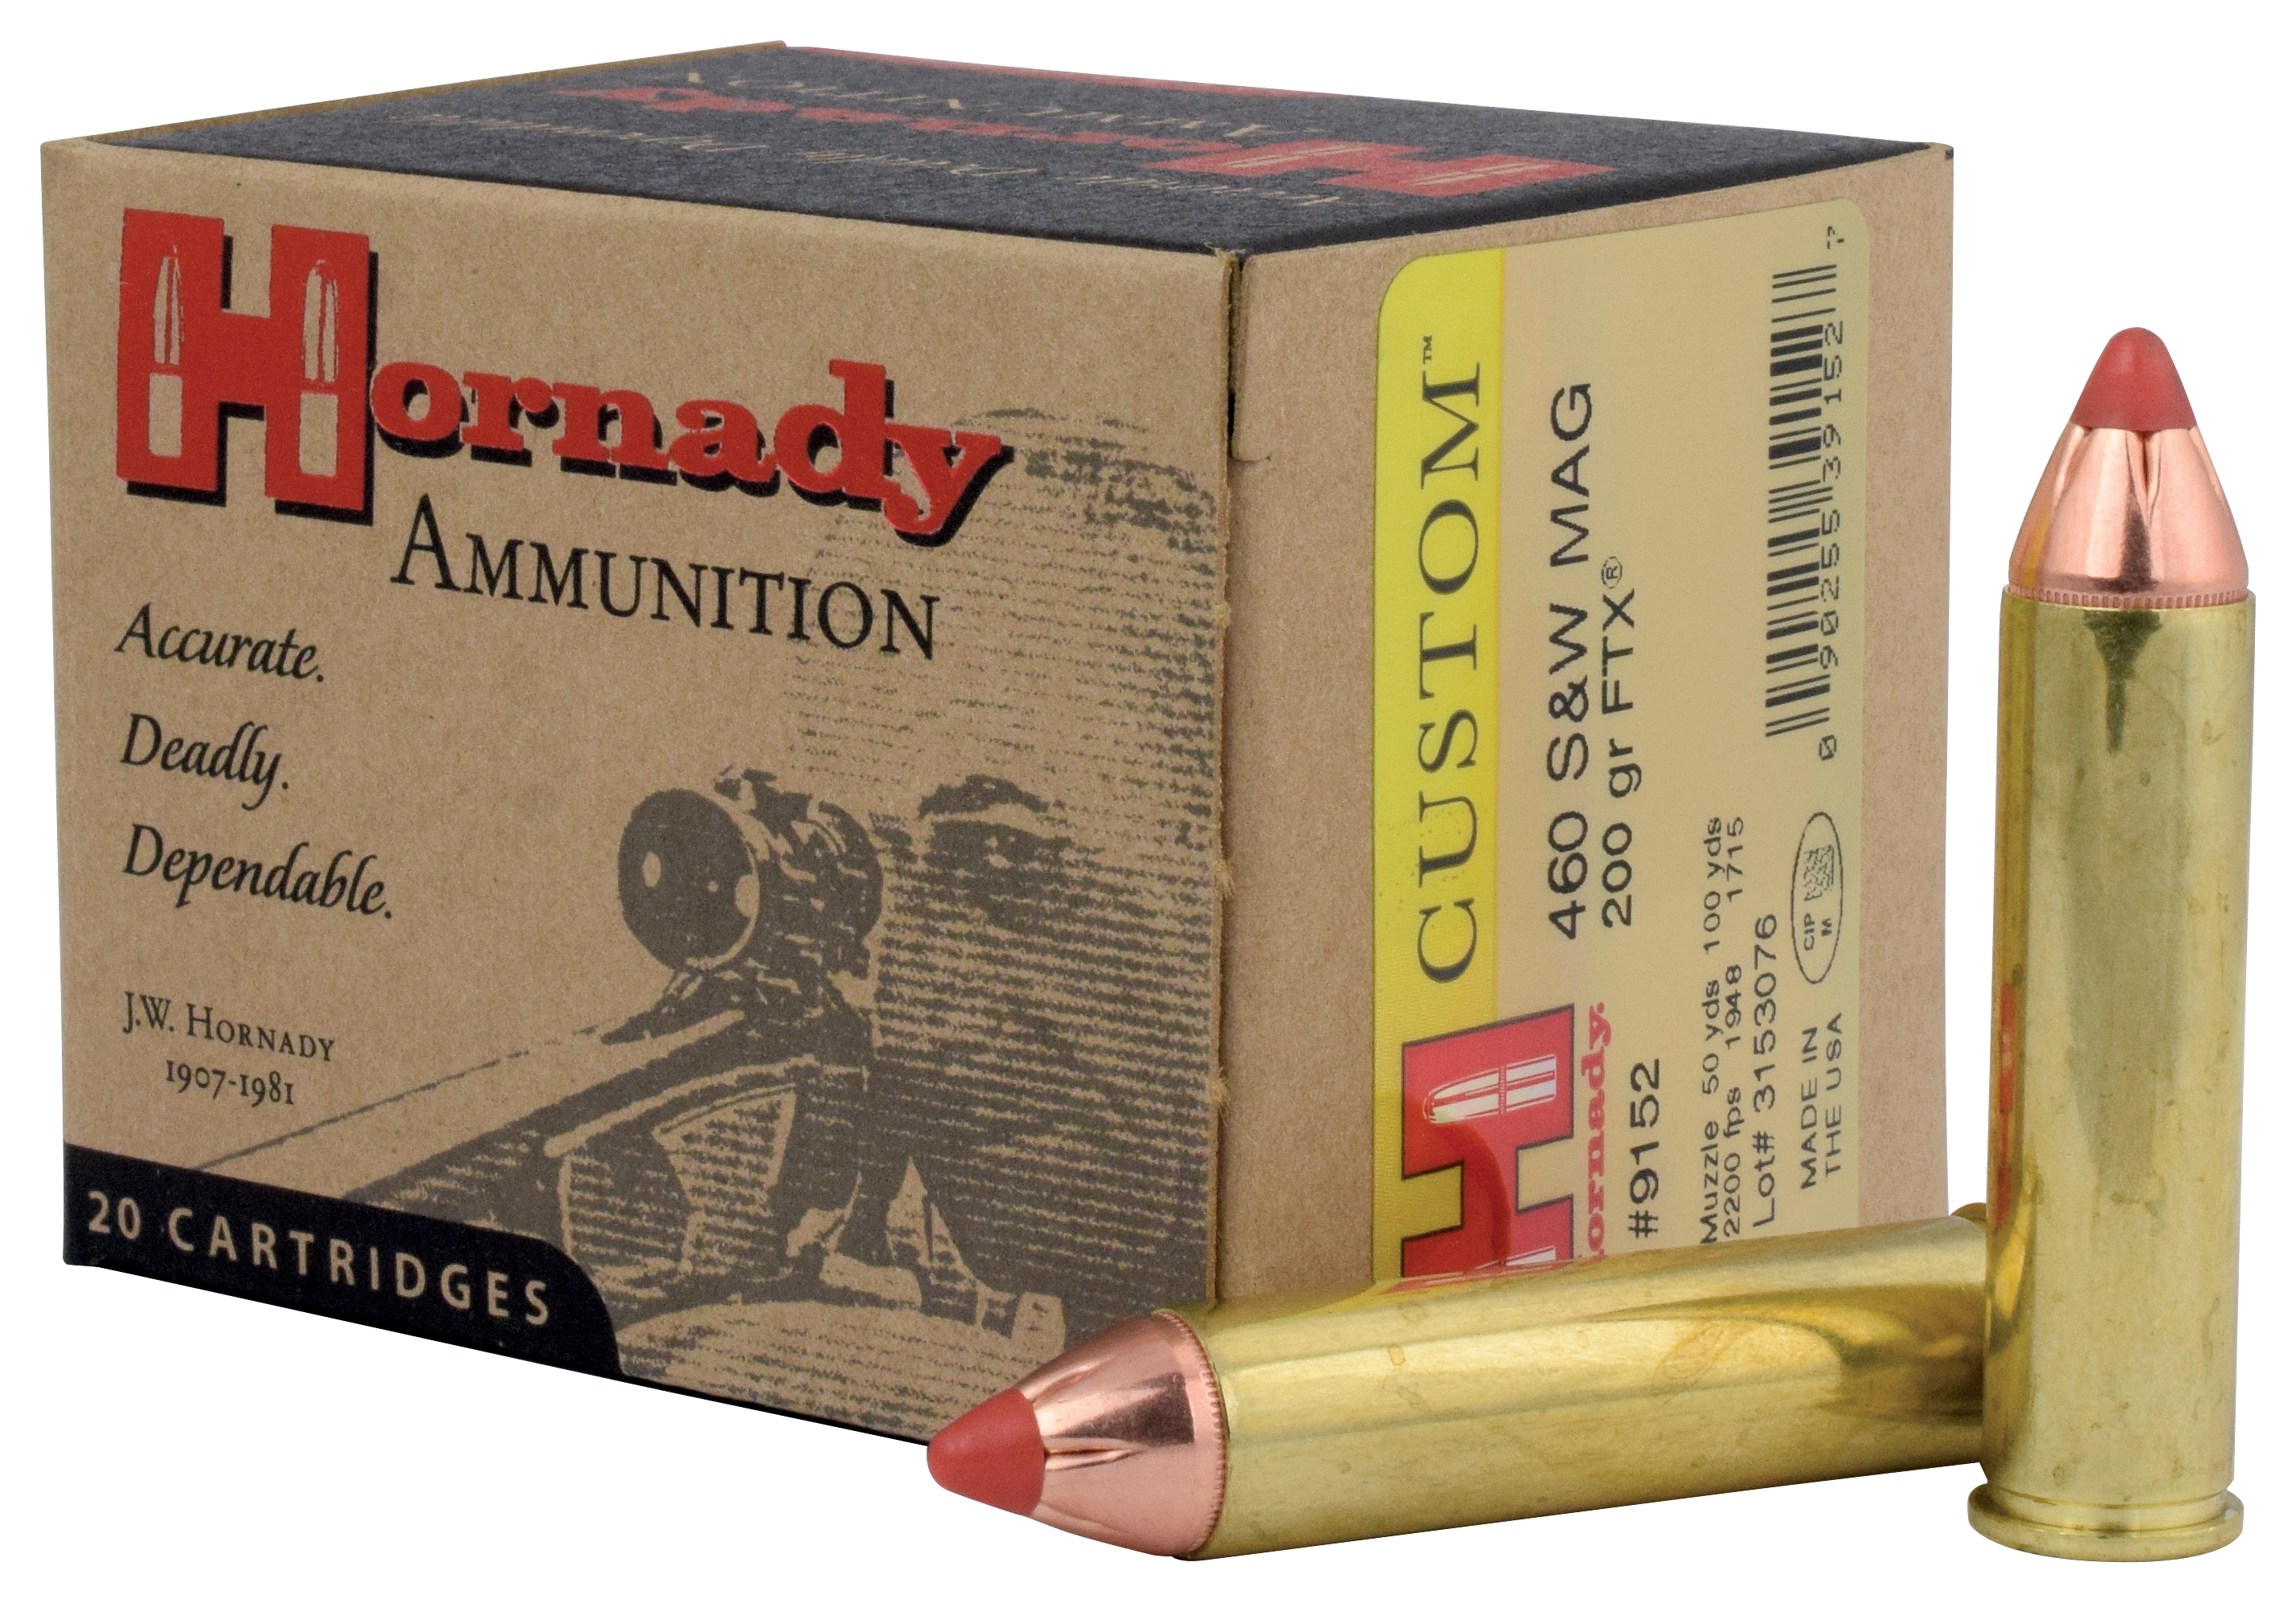 Big Bore Cartridges Compared! Velocity Tests and more! 460 S&W vs